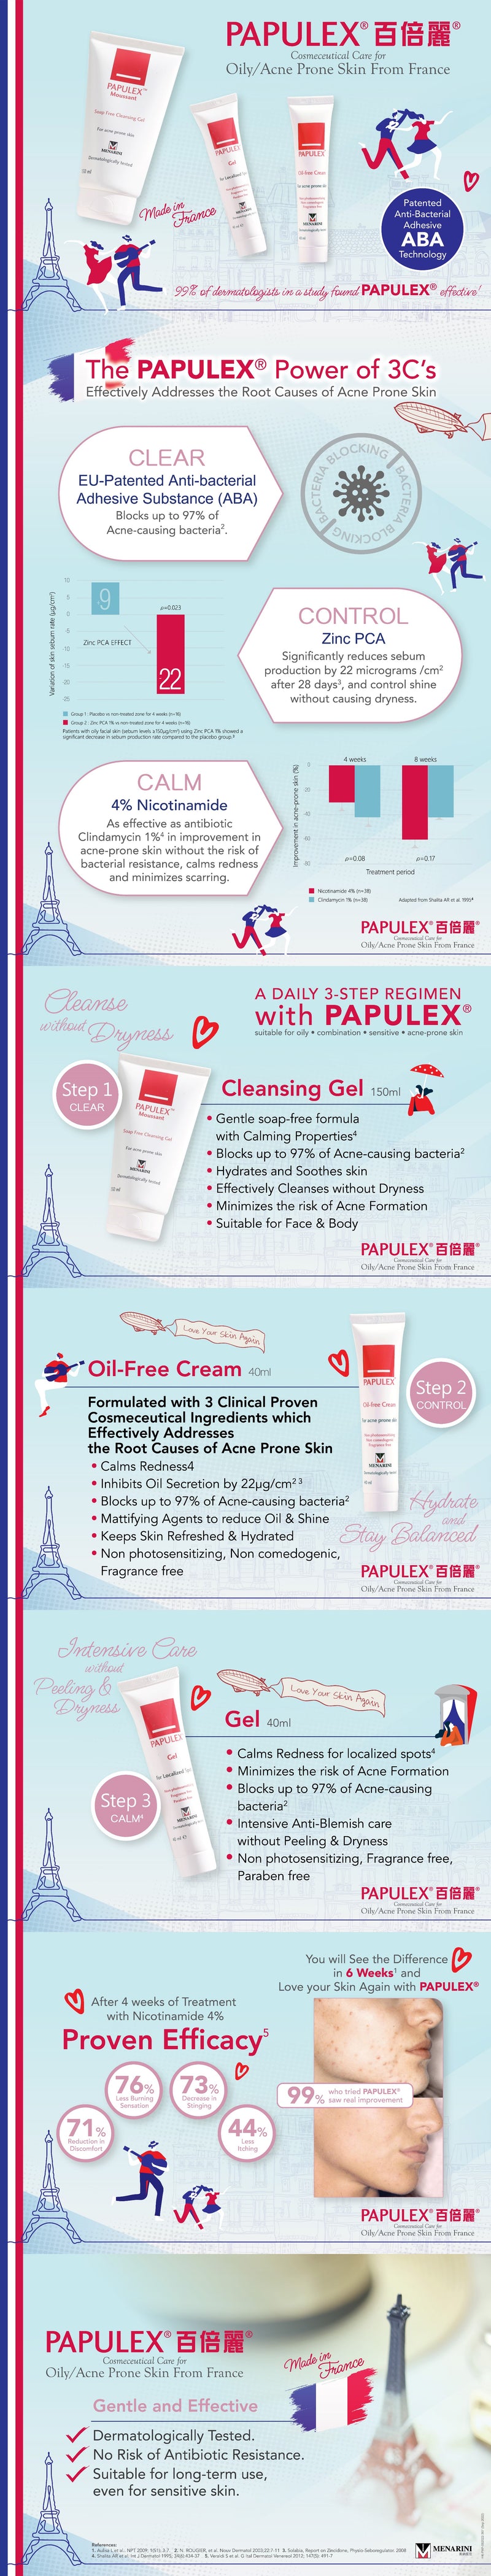 PAPULEX Anti-Bacterial Oil Free Cream #Acne Prone #Maskne #Oily Skin #Oil Control #Hydration #Face Cream #T Zone [HK Label Authentic Product] Expiry: 2024-03-10